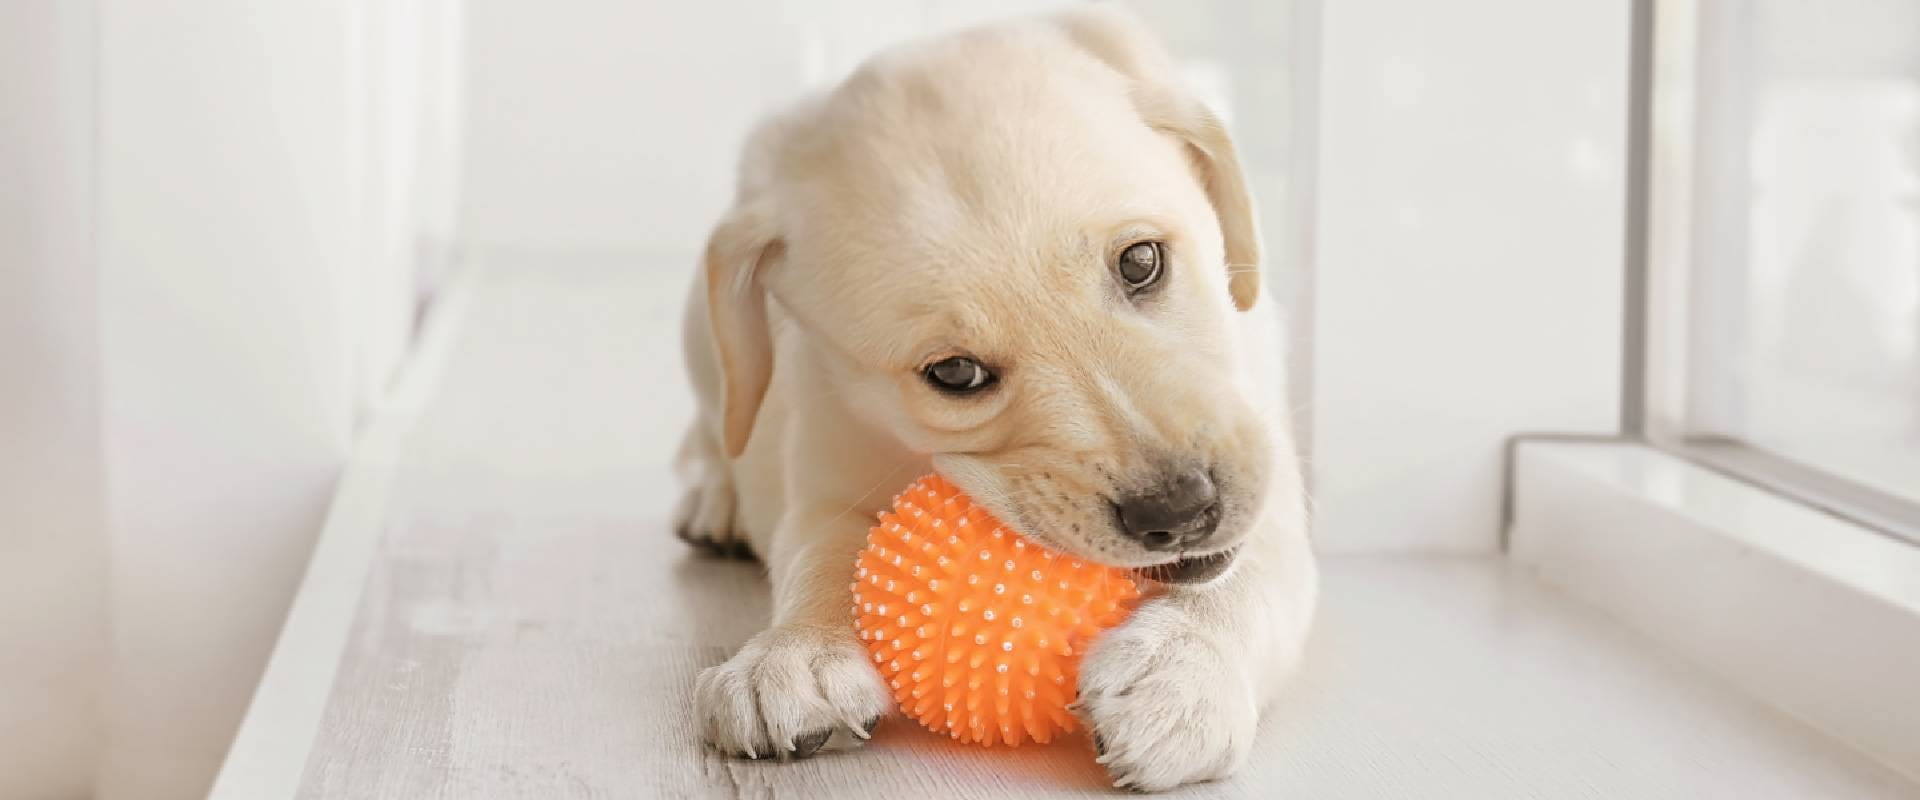 Labrador Retriever puppy playing with rubber ball